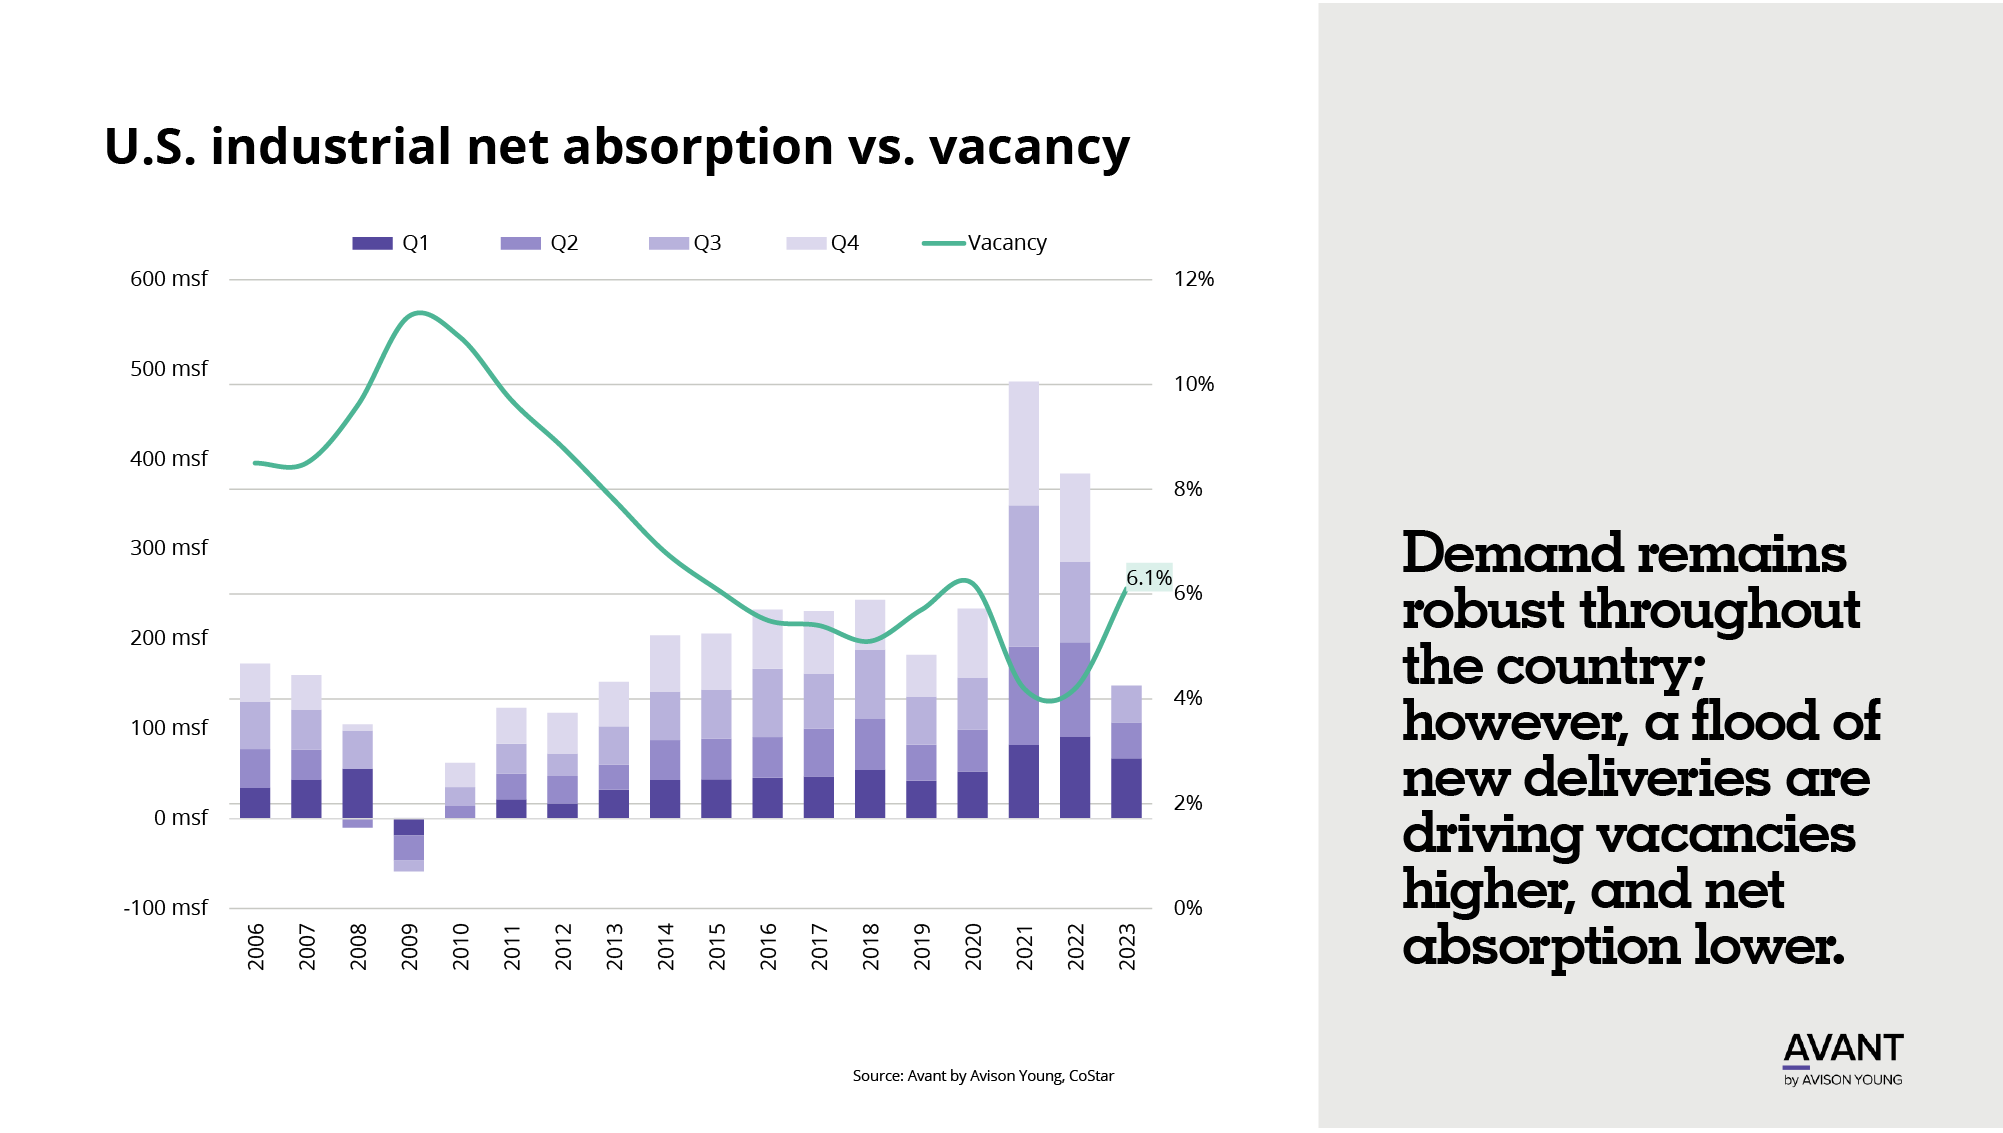 chart of annual industrial net absorption and vacancy in the United States from 2006 to 2023